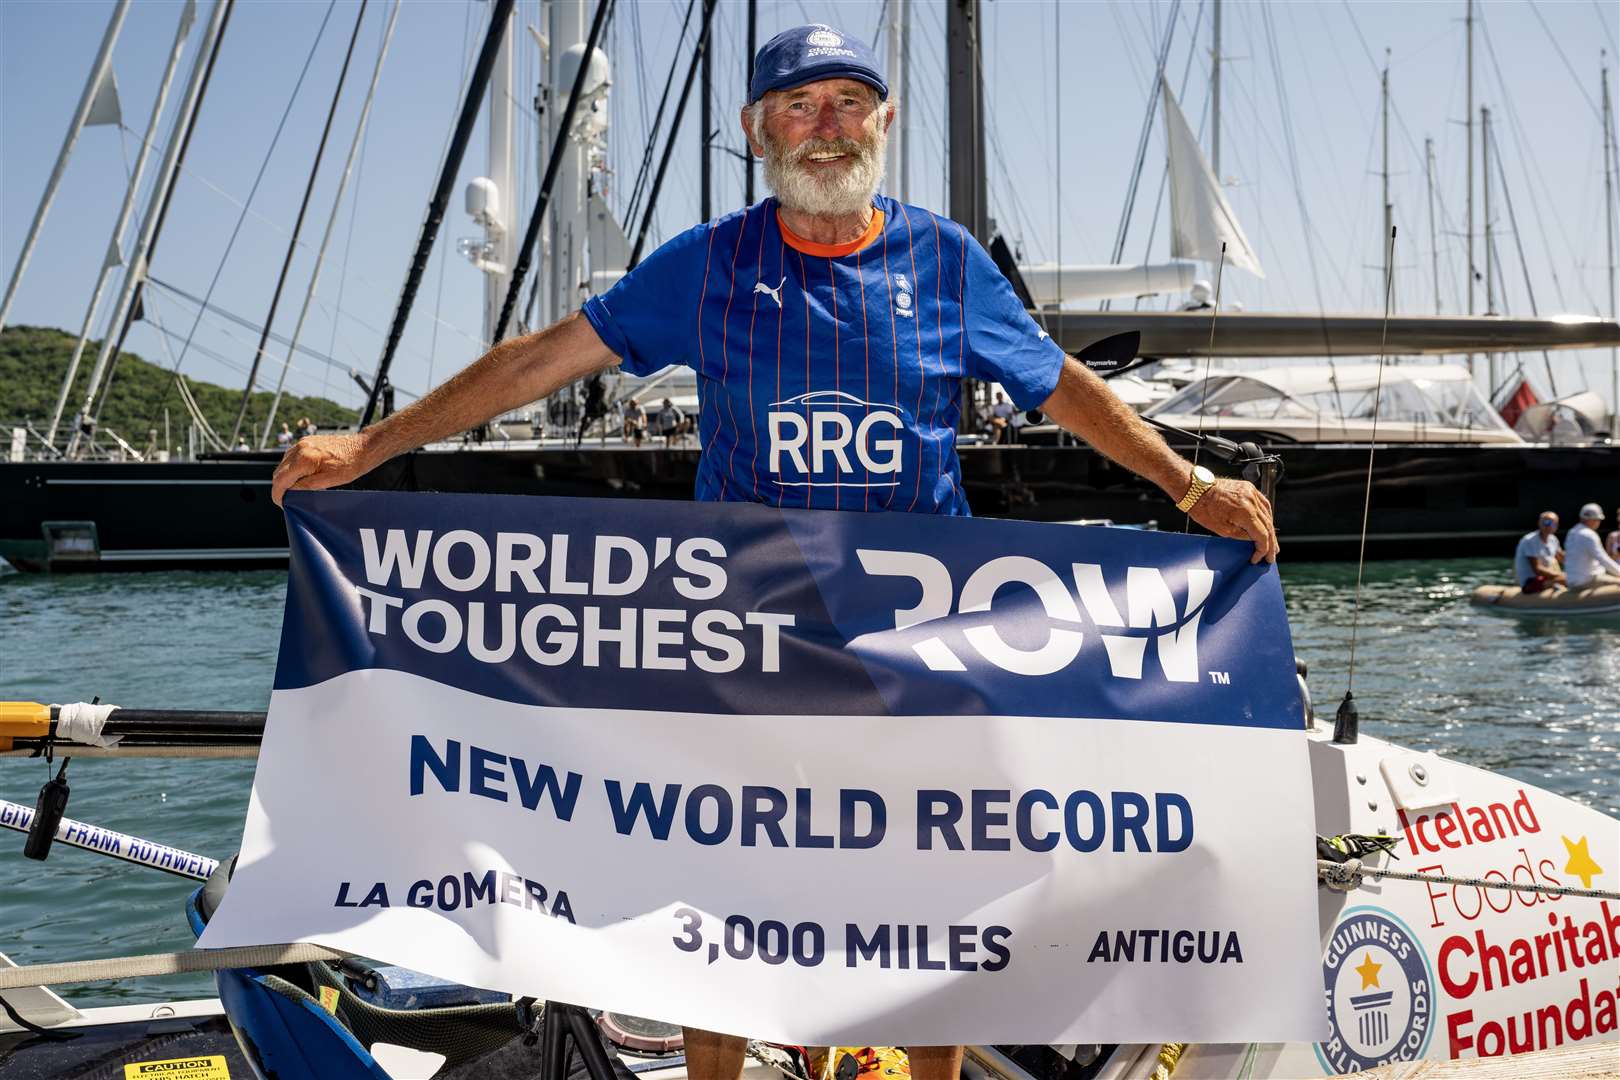 Frank Rothwell said it was ‘special’ to beat his own Guinness World Record (World’s Toughest Row/PA)